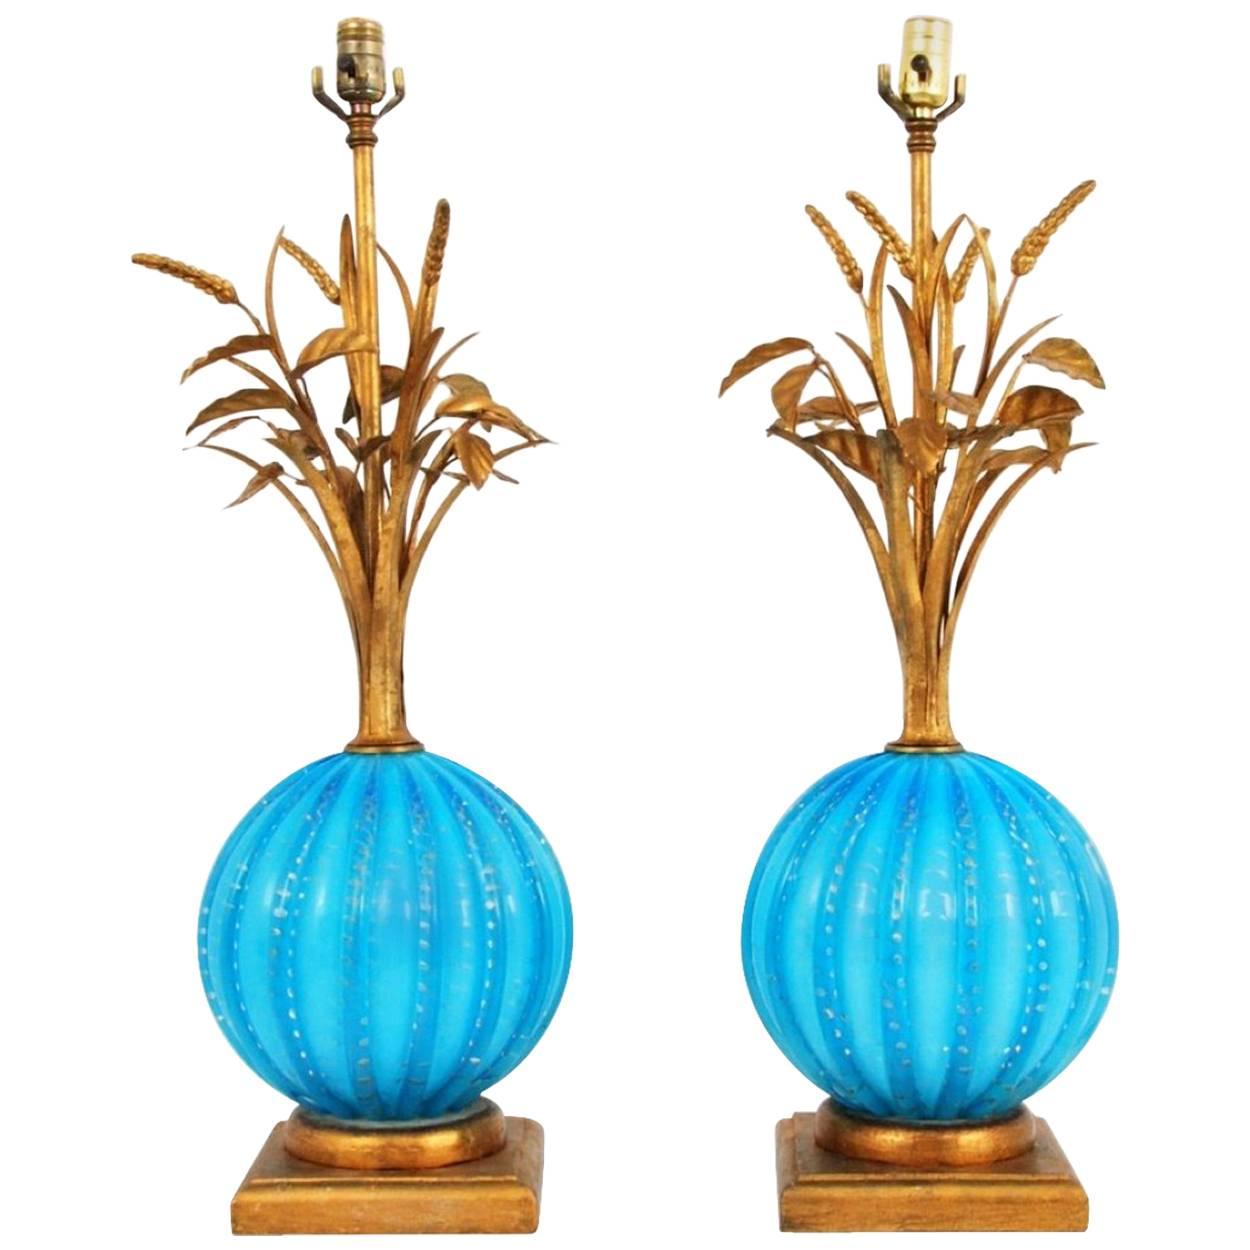 Pair of Murano Lamps Attributed to Barovier & Toso